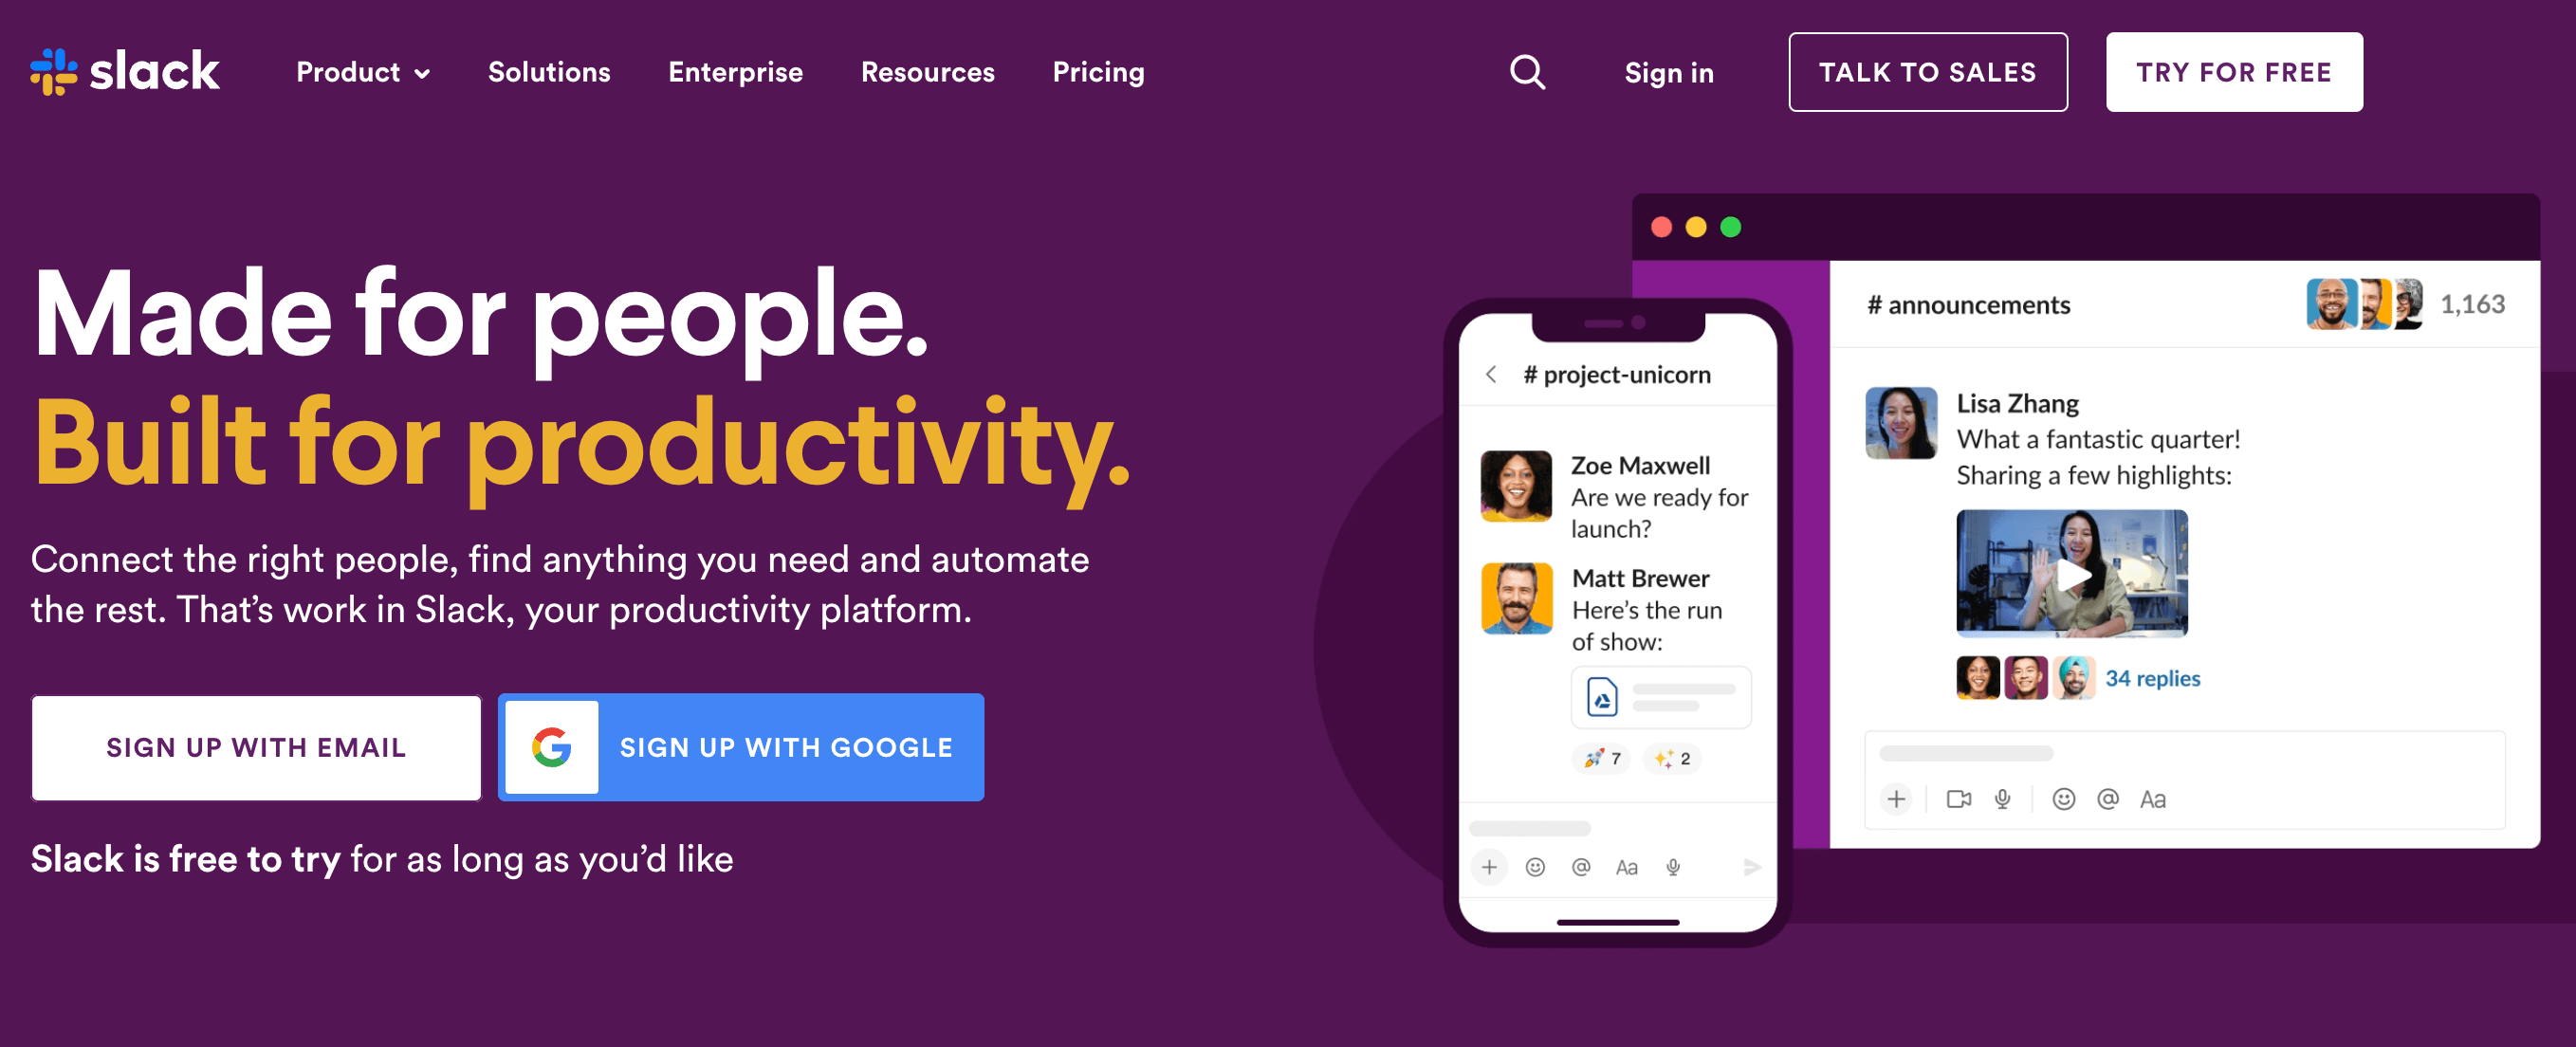 Slack's purple coloured website homepage presenting it as a productivity platform made for people.